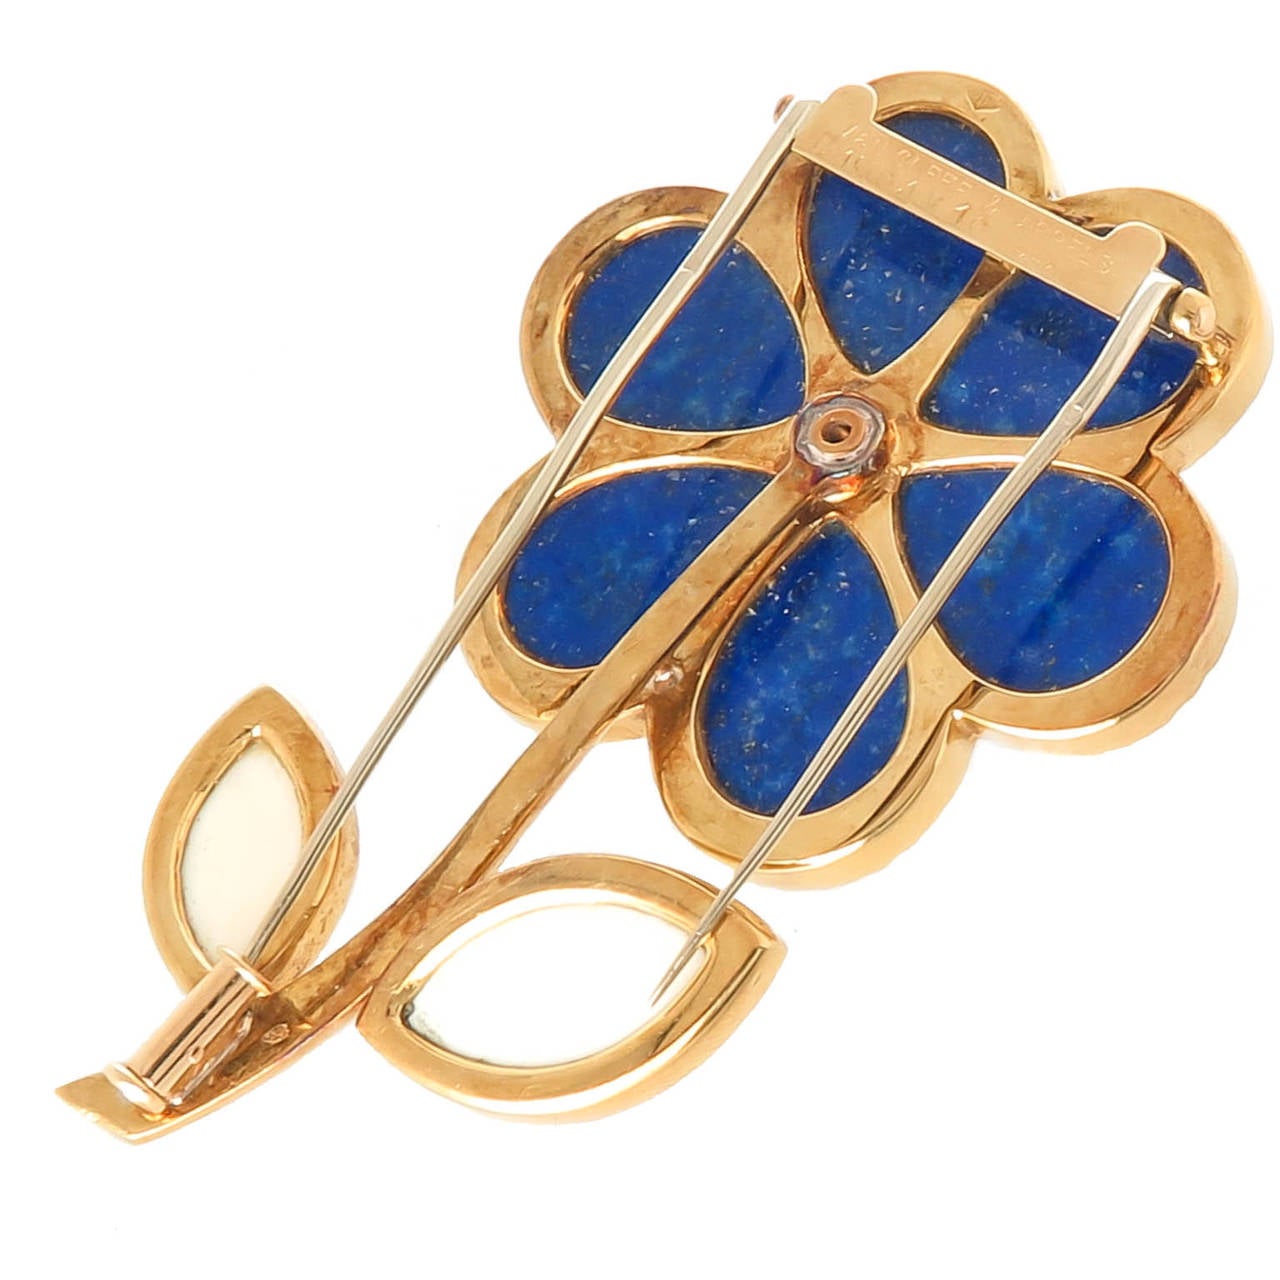 Circa 1970s Van Cleef and Arpels Large Flower Brooch, 18K Yellow Gold, set with Diamonds, Lapis Lazuli and White Bone. Having a Double pin- clip back. Signed, Numbered and Having French Hall Marks.